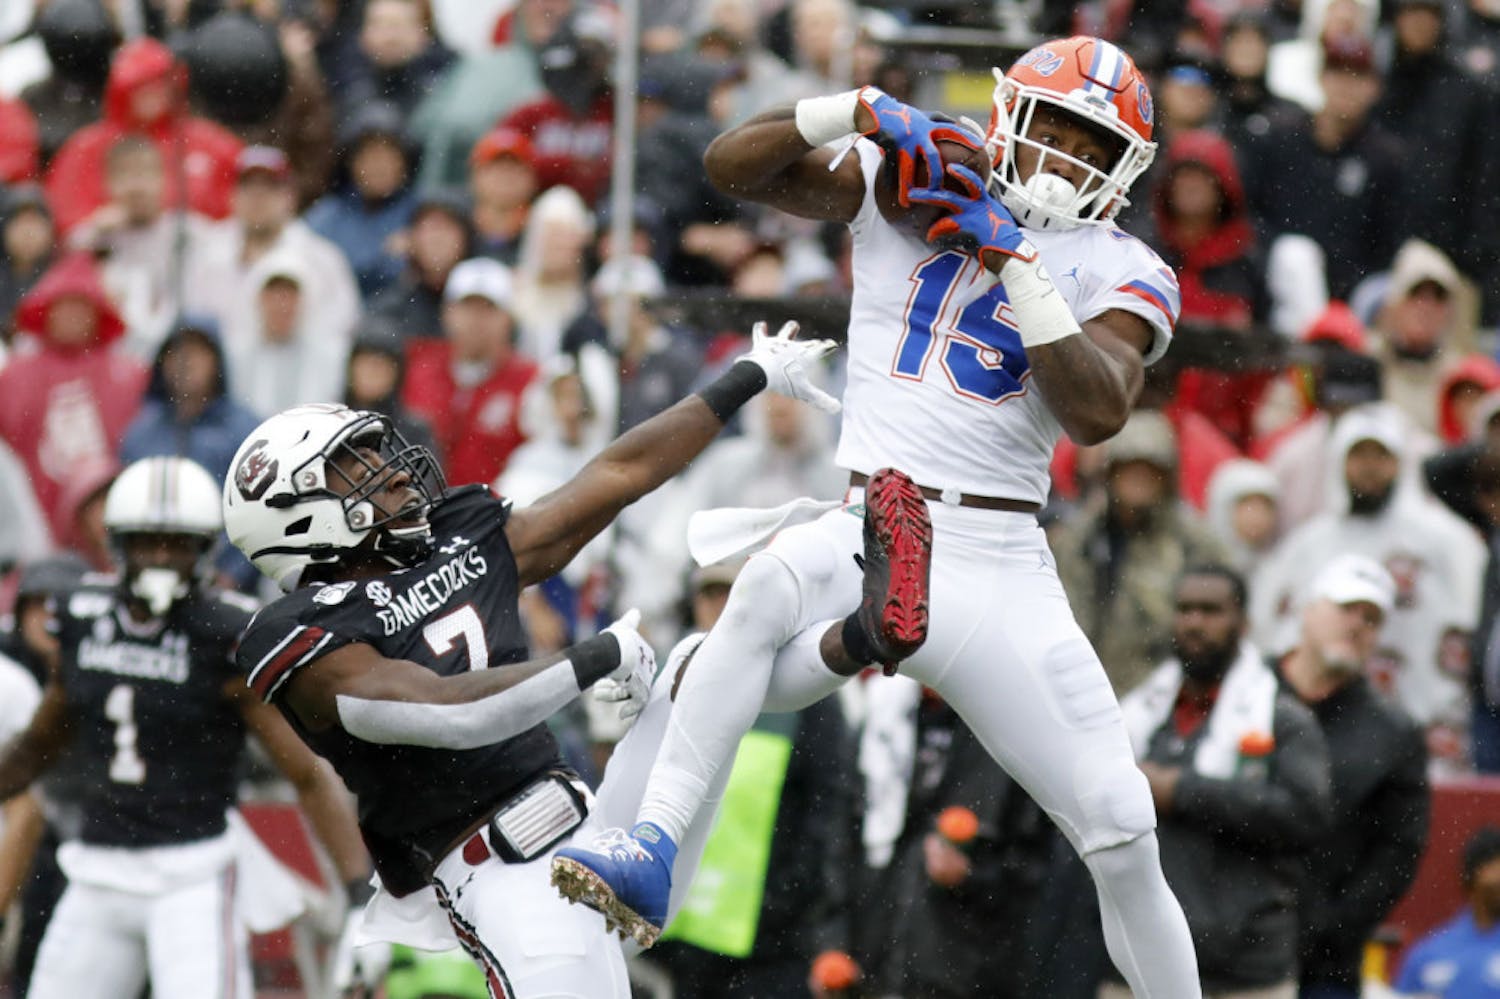 Jacob Copeland catches a touchdown against South Carolina in 2019. Copeland unveiled his personal logo Wednesday on the heels of the NIL bill going into effect Thursday.